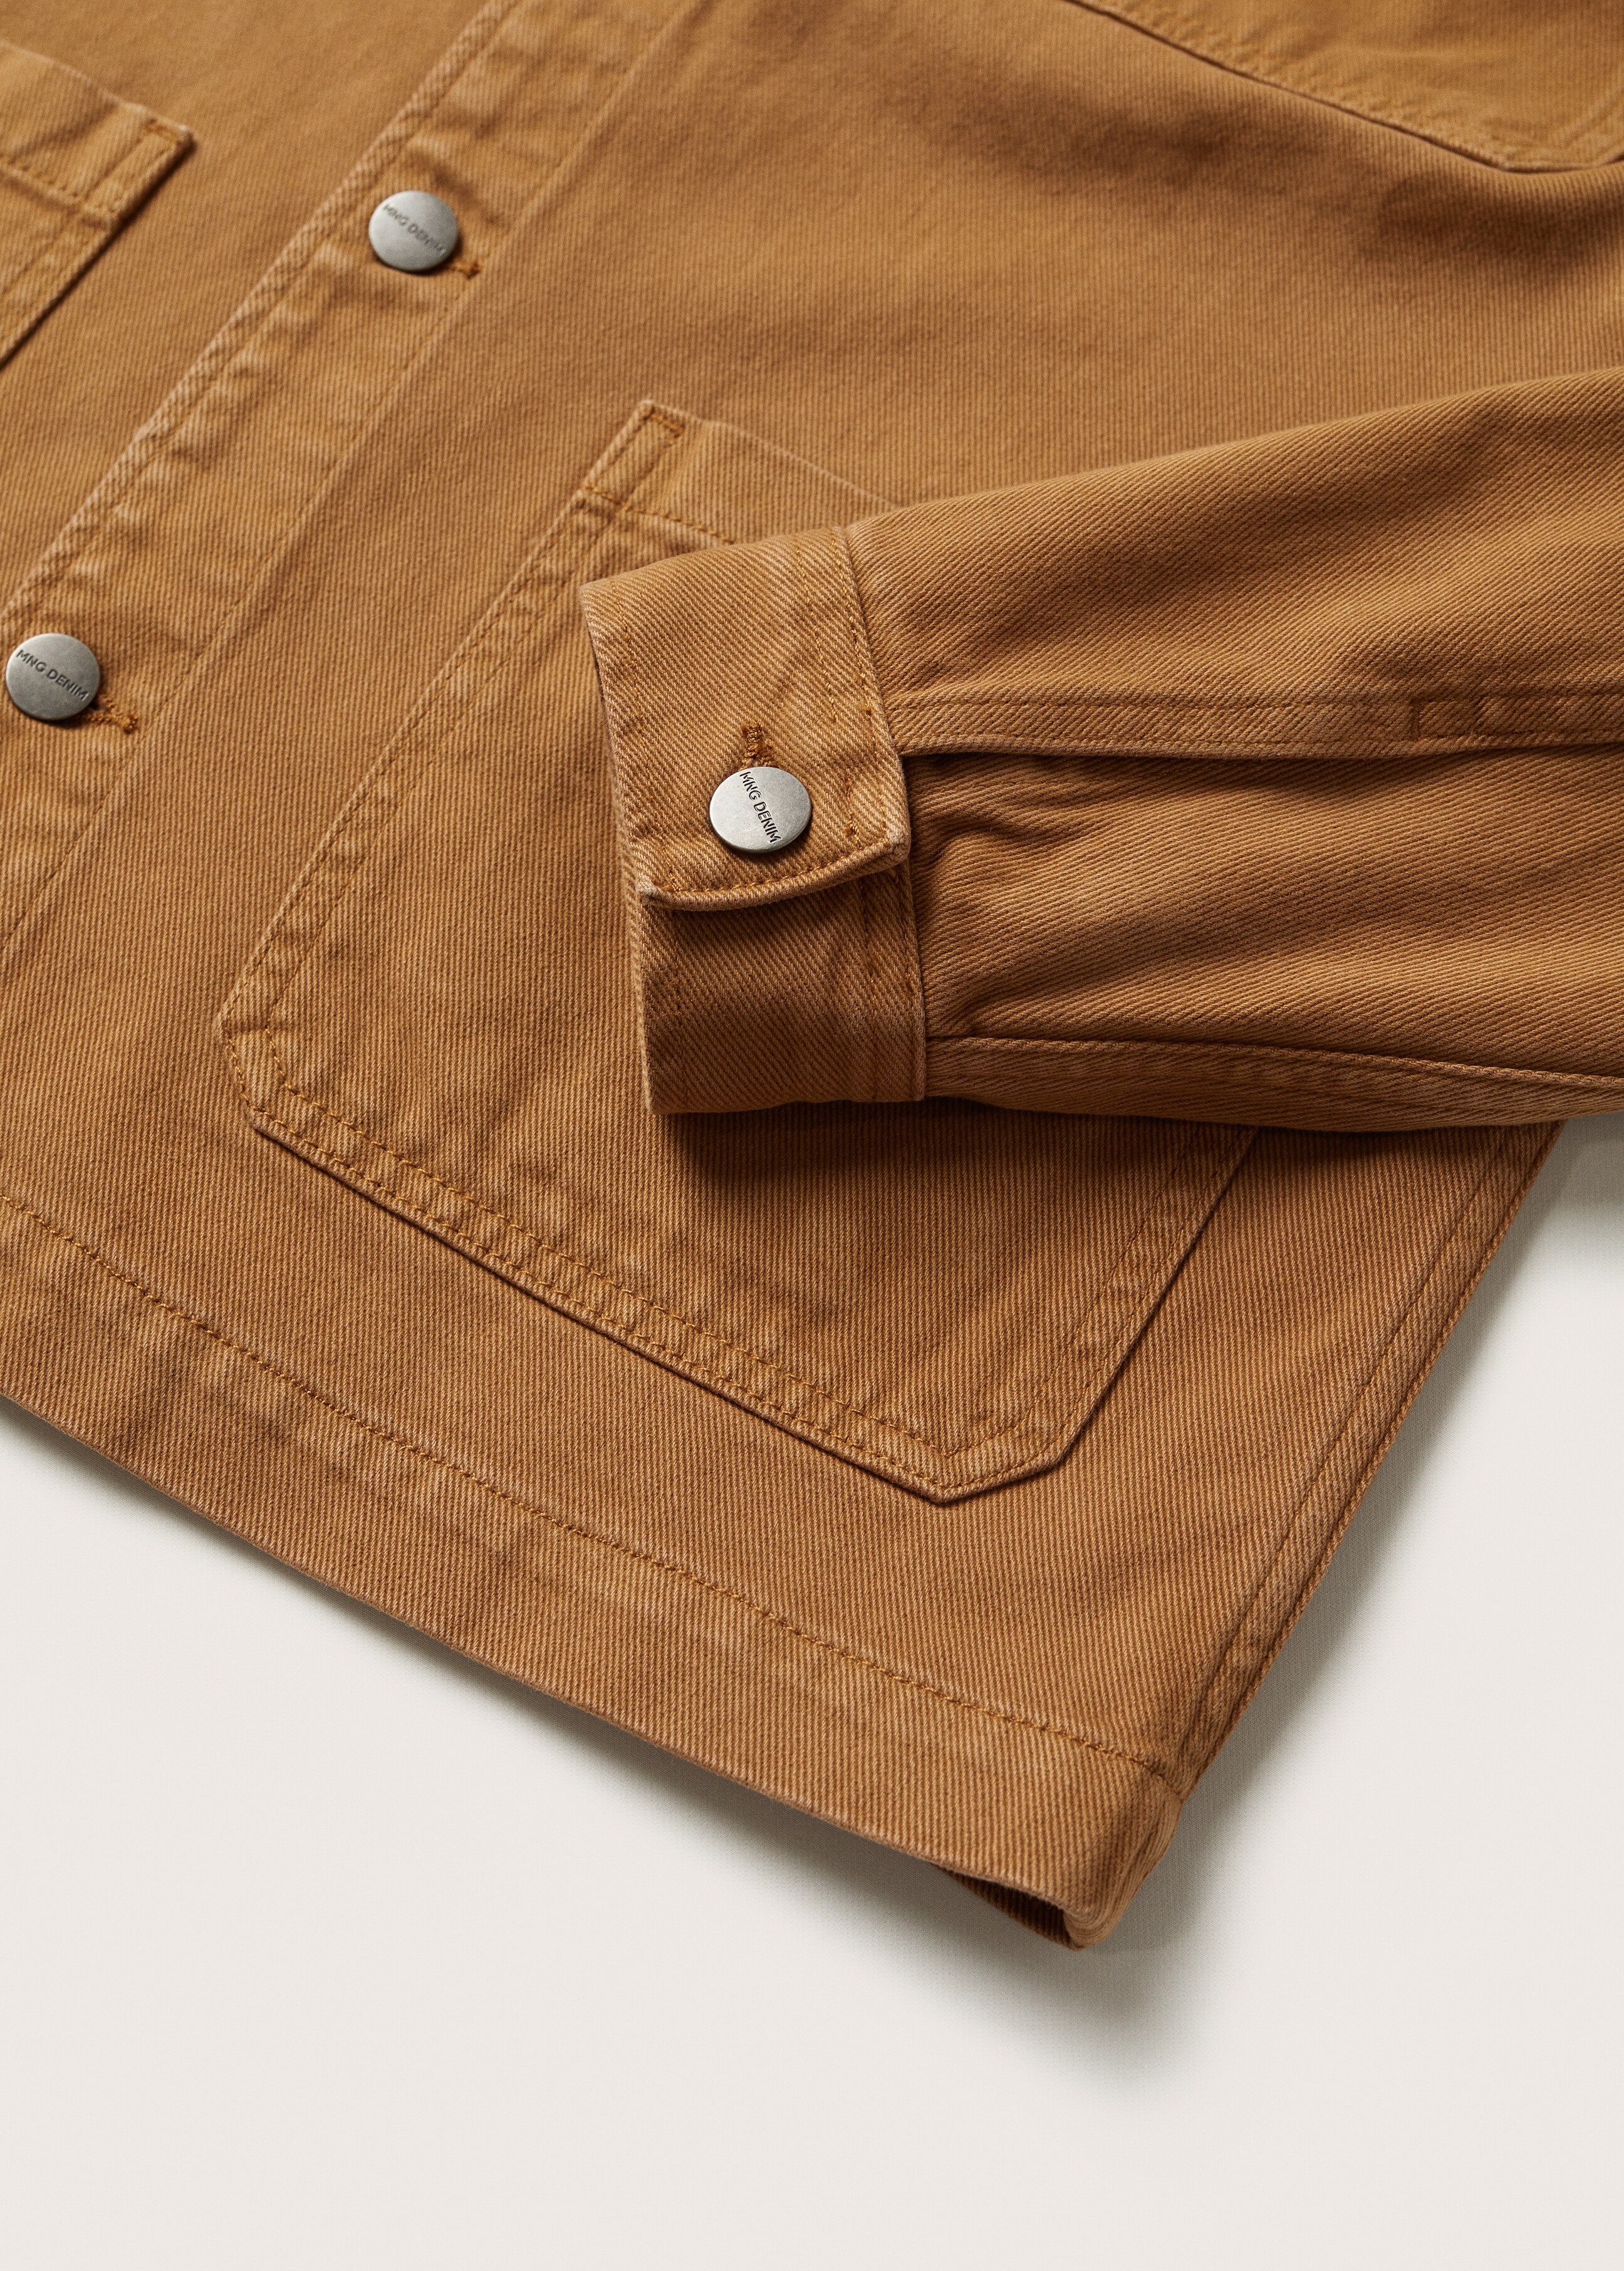 Denim worker overshirt - Details of the article 7